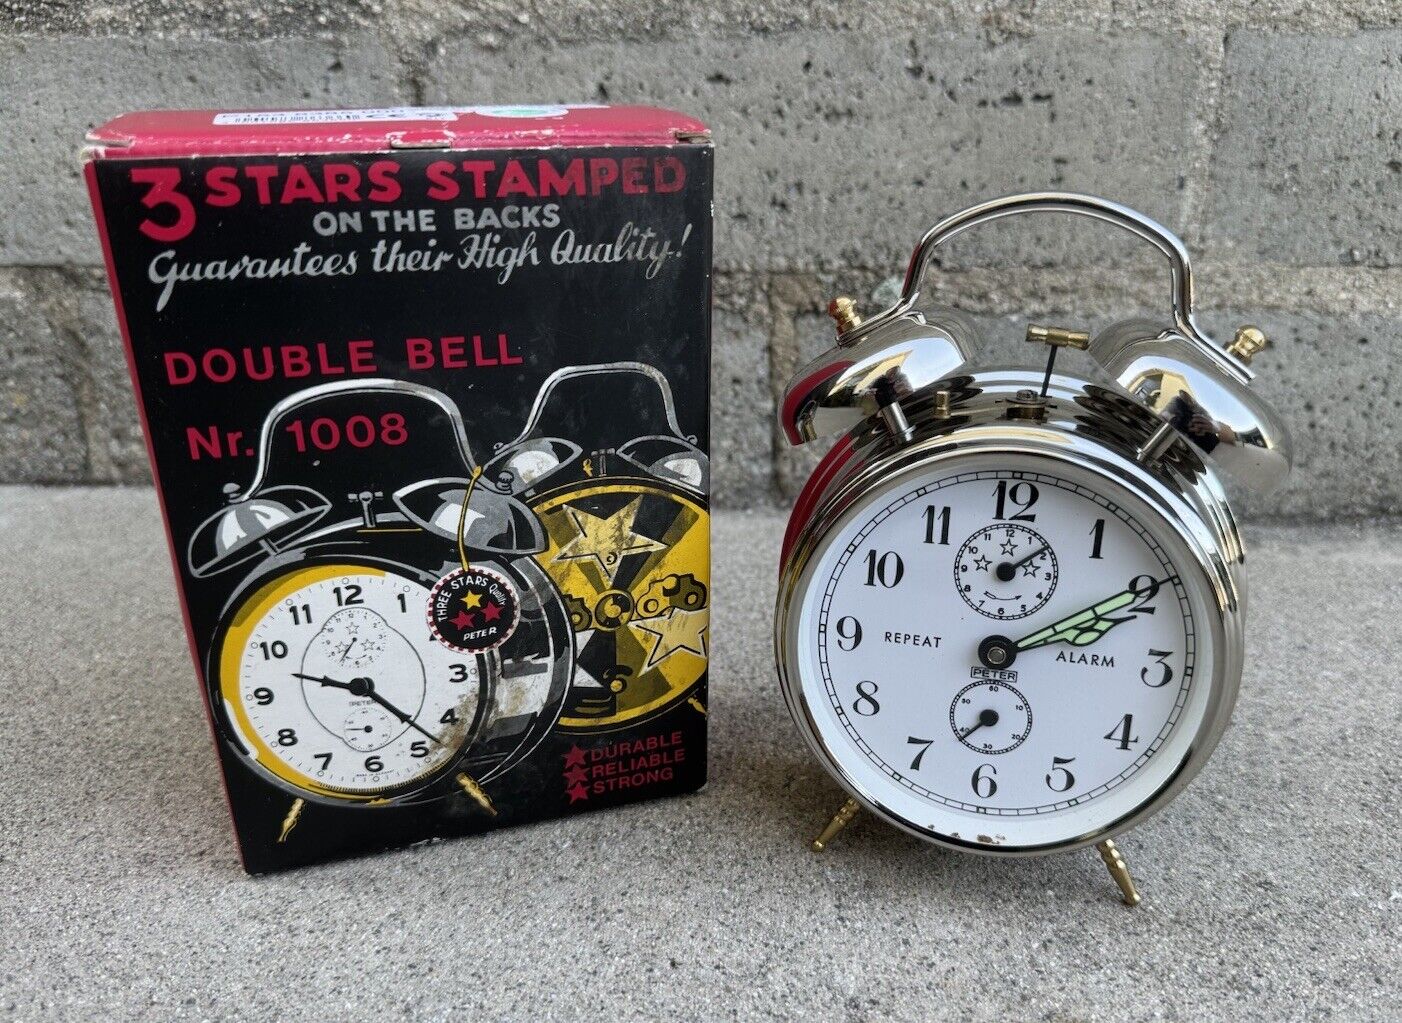 VTG Peter Repeat Double Bell Alarm Clock German Stainless Steel 3 Stars Stamped